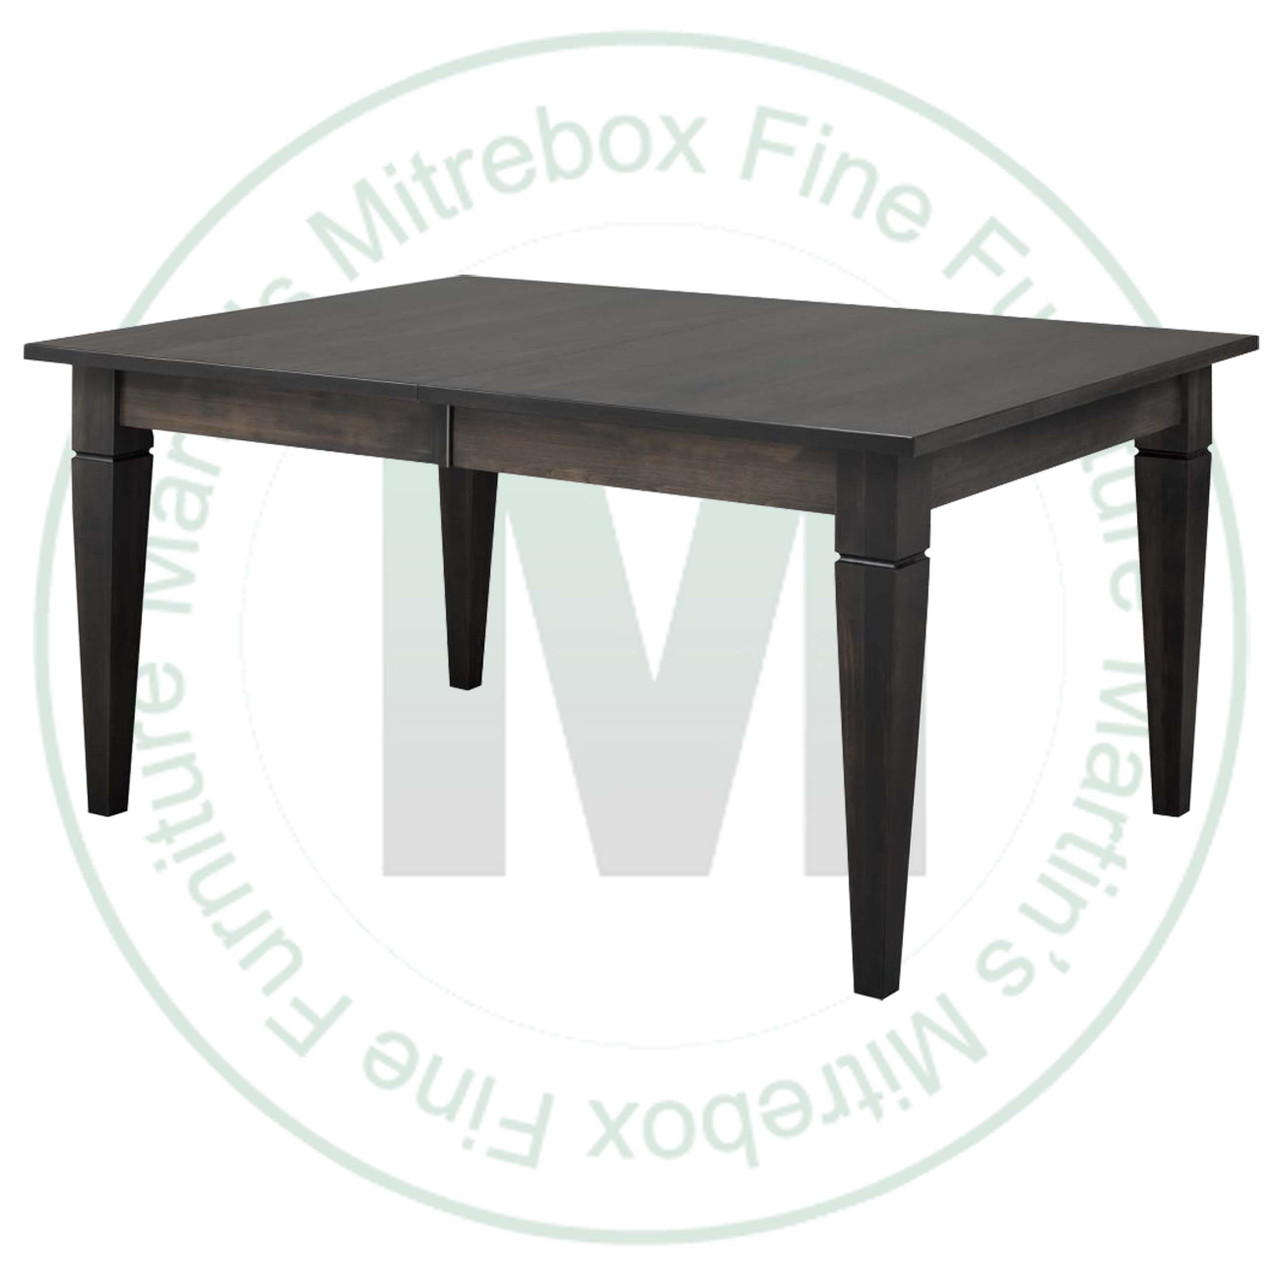 Maple Reesor Extension Harvest Table 60''D x 60''W x 30''H With 3 - 12'' Leaves Table Has 1'' Thick Top